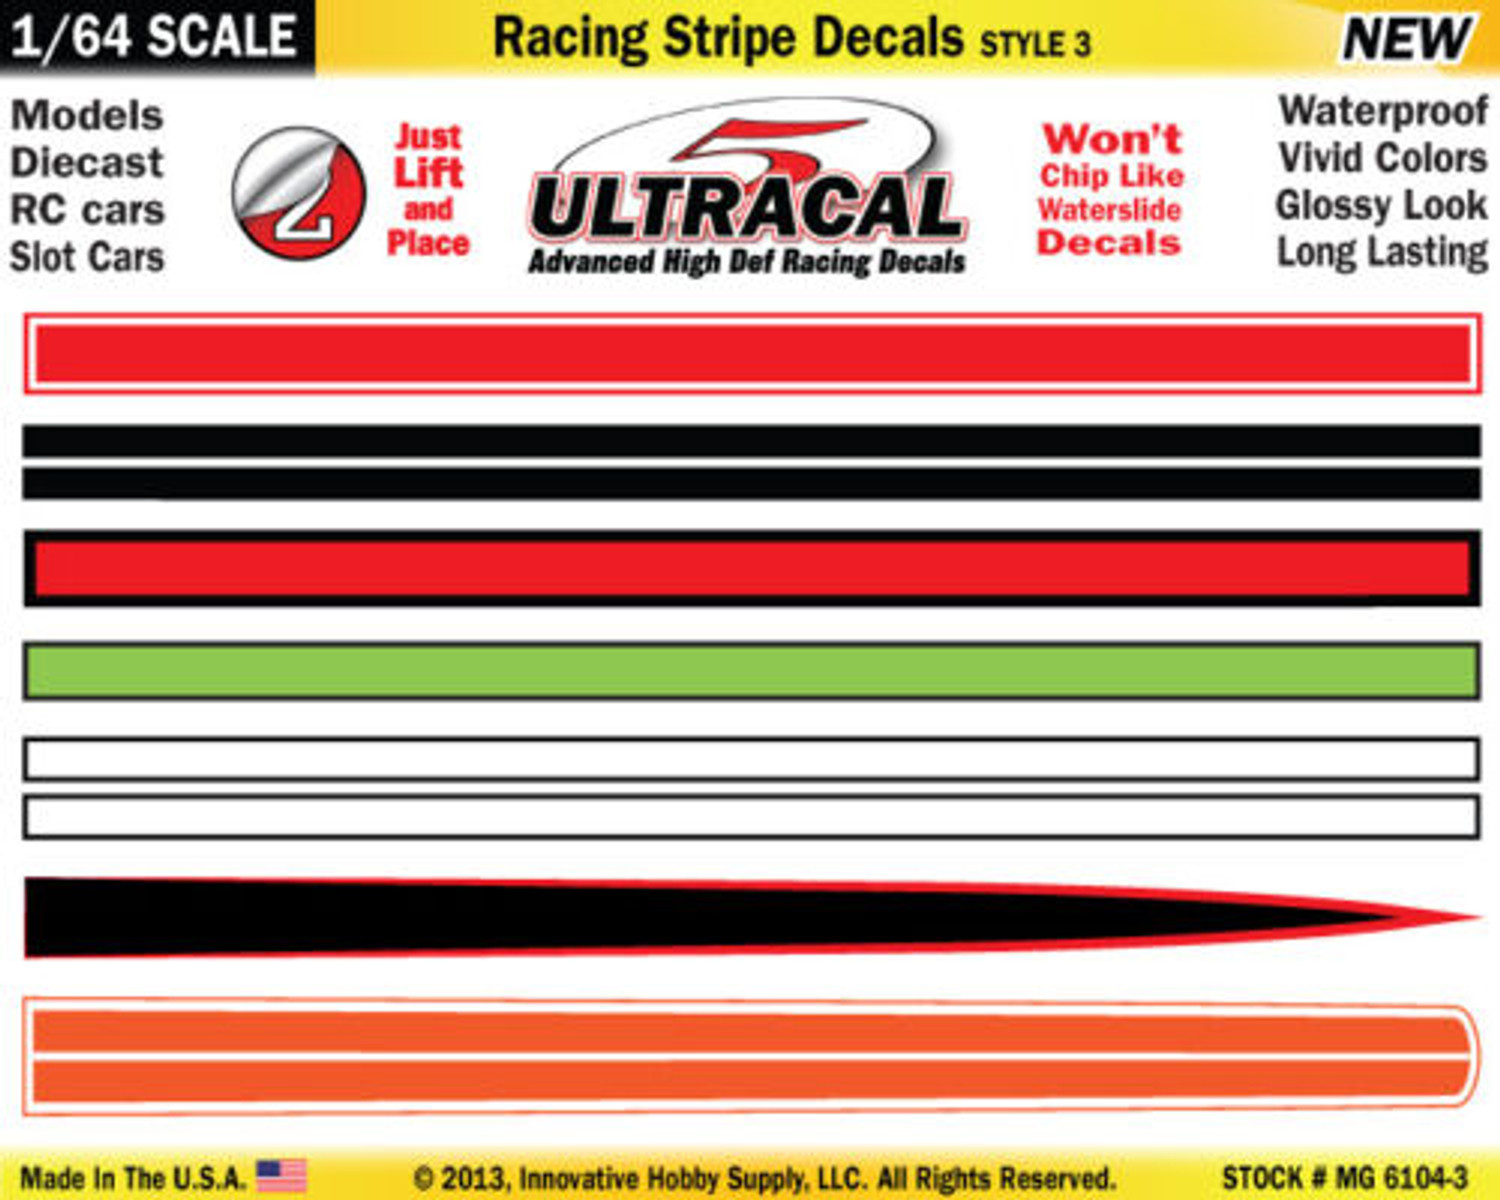 MG 6104-3 UltraCal Racing Stripe Decals Style 3 Red White Stripe 1:64 Scale